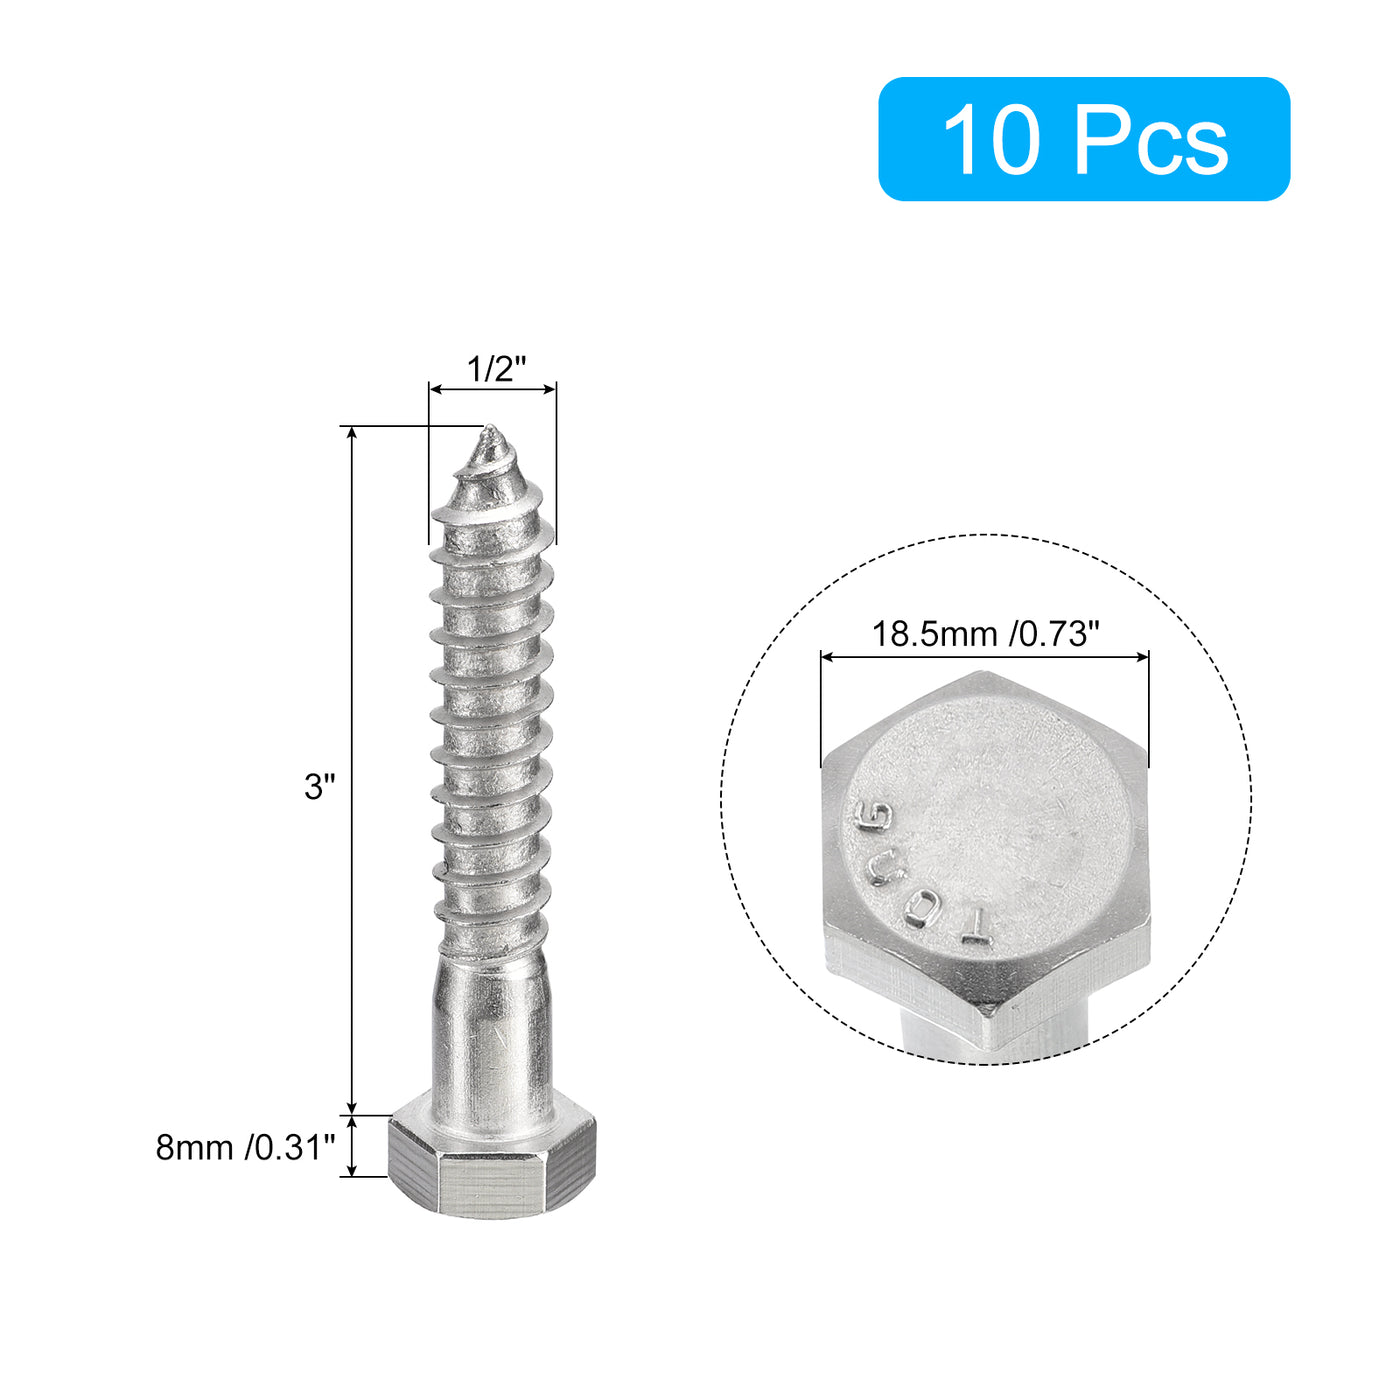 uxcell Uxcell Hex Head Lag Screws Bolts, 10pcs 1/2" x 3" 304 Stainless Steel Wood Screws